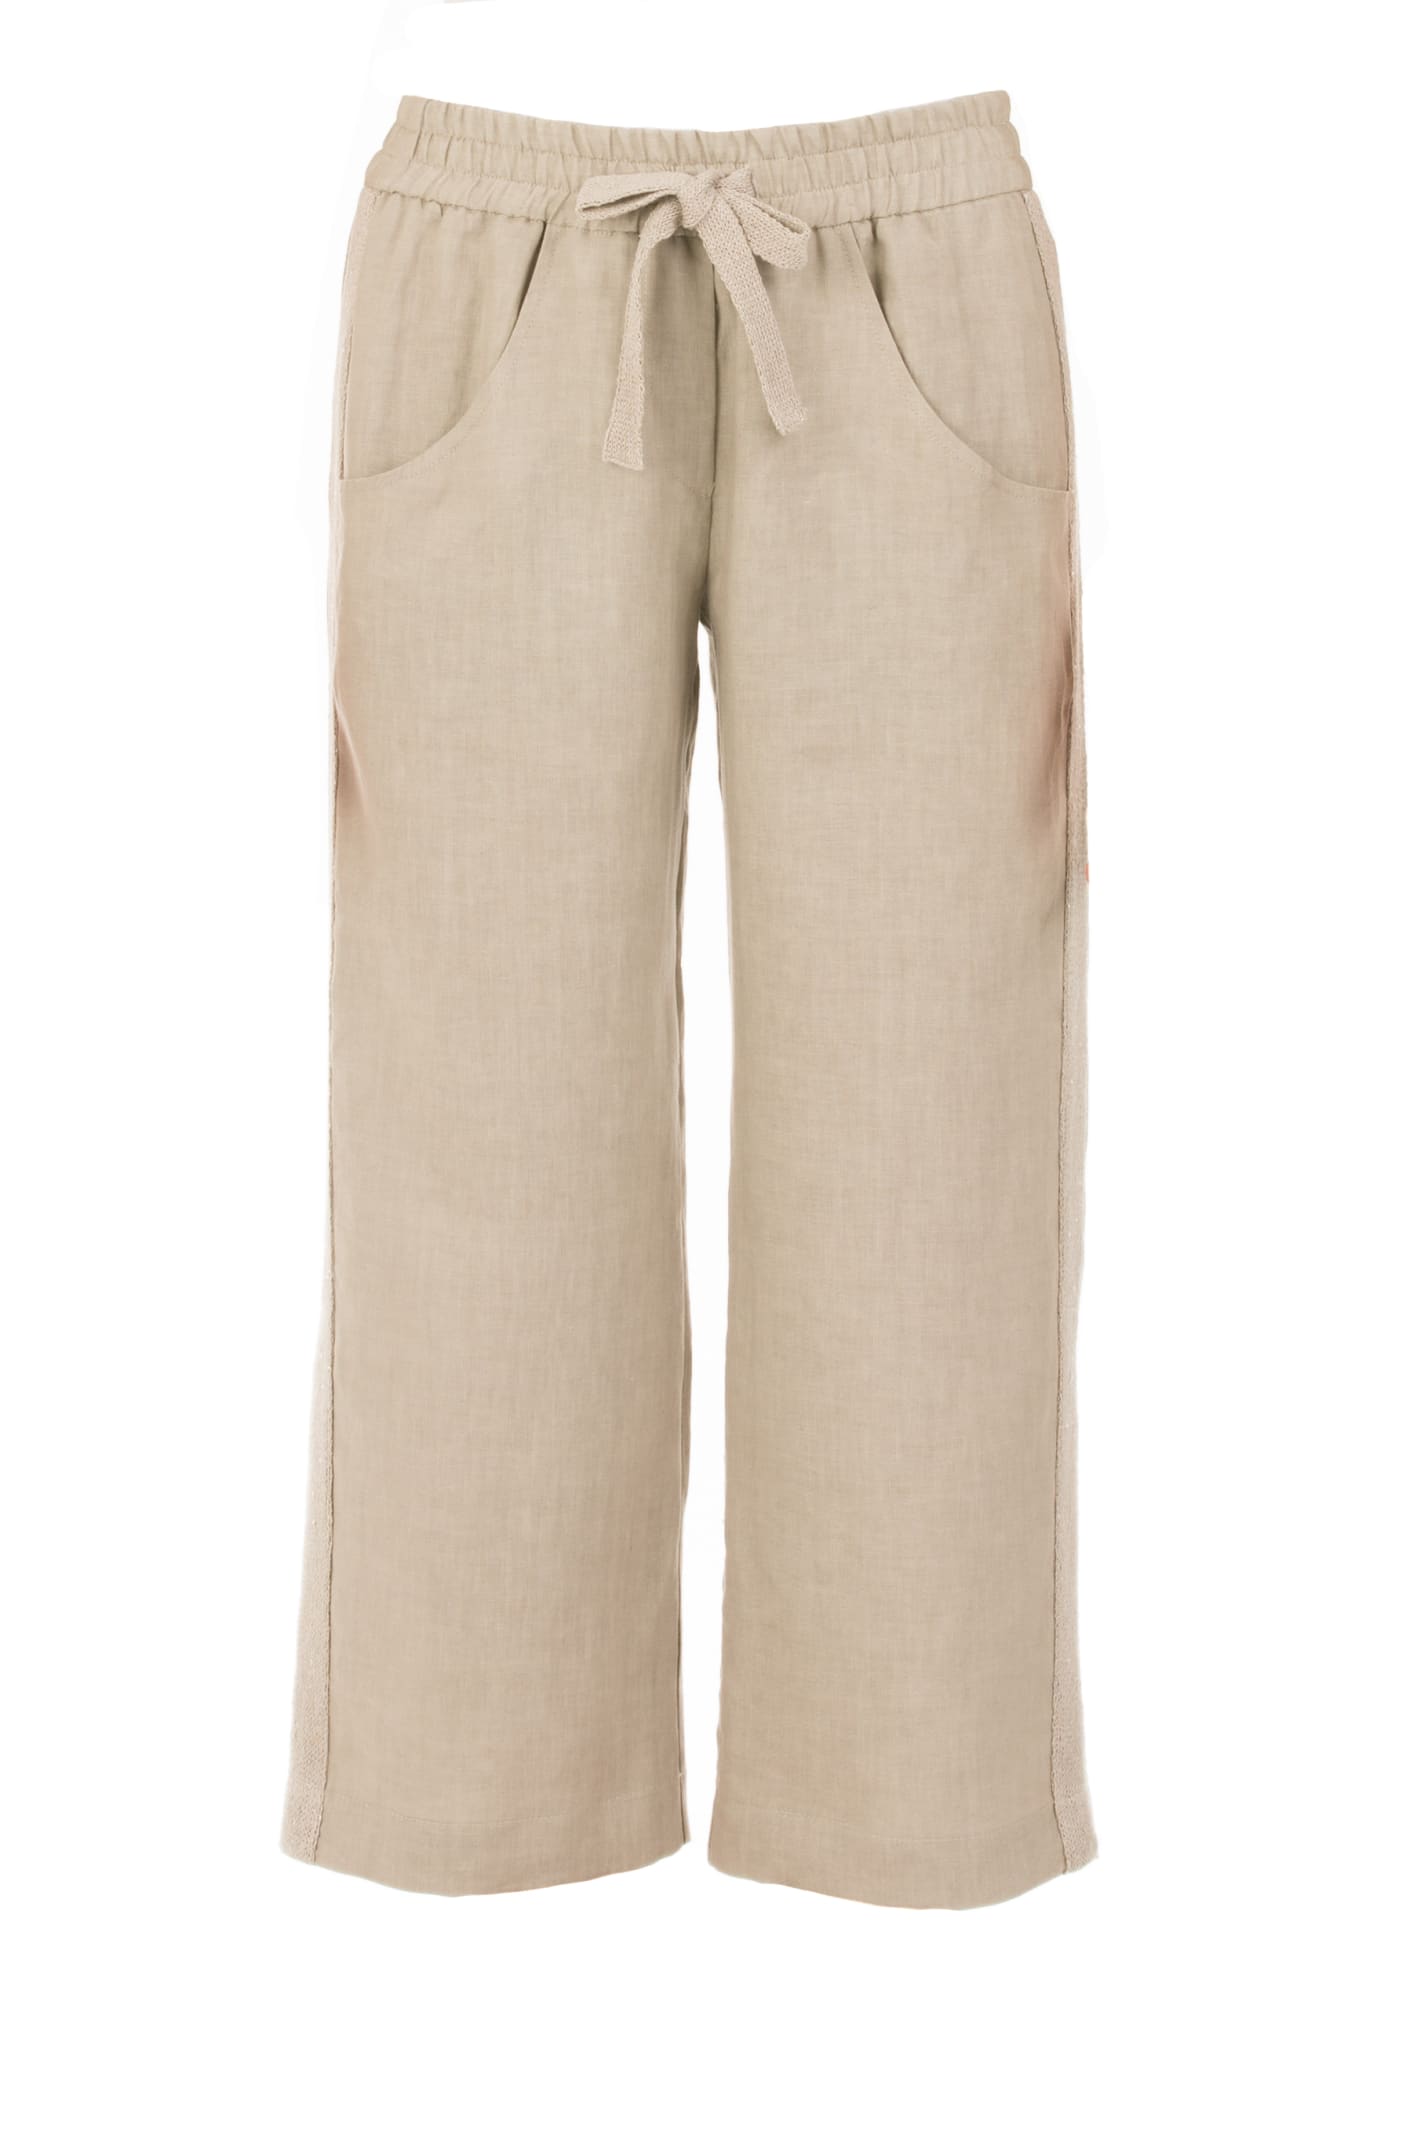 Le Tricot Perugia Trousers With Drawstring At The Waist